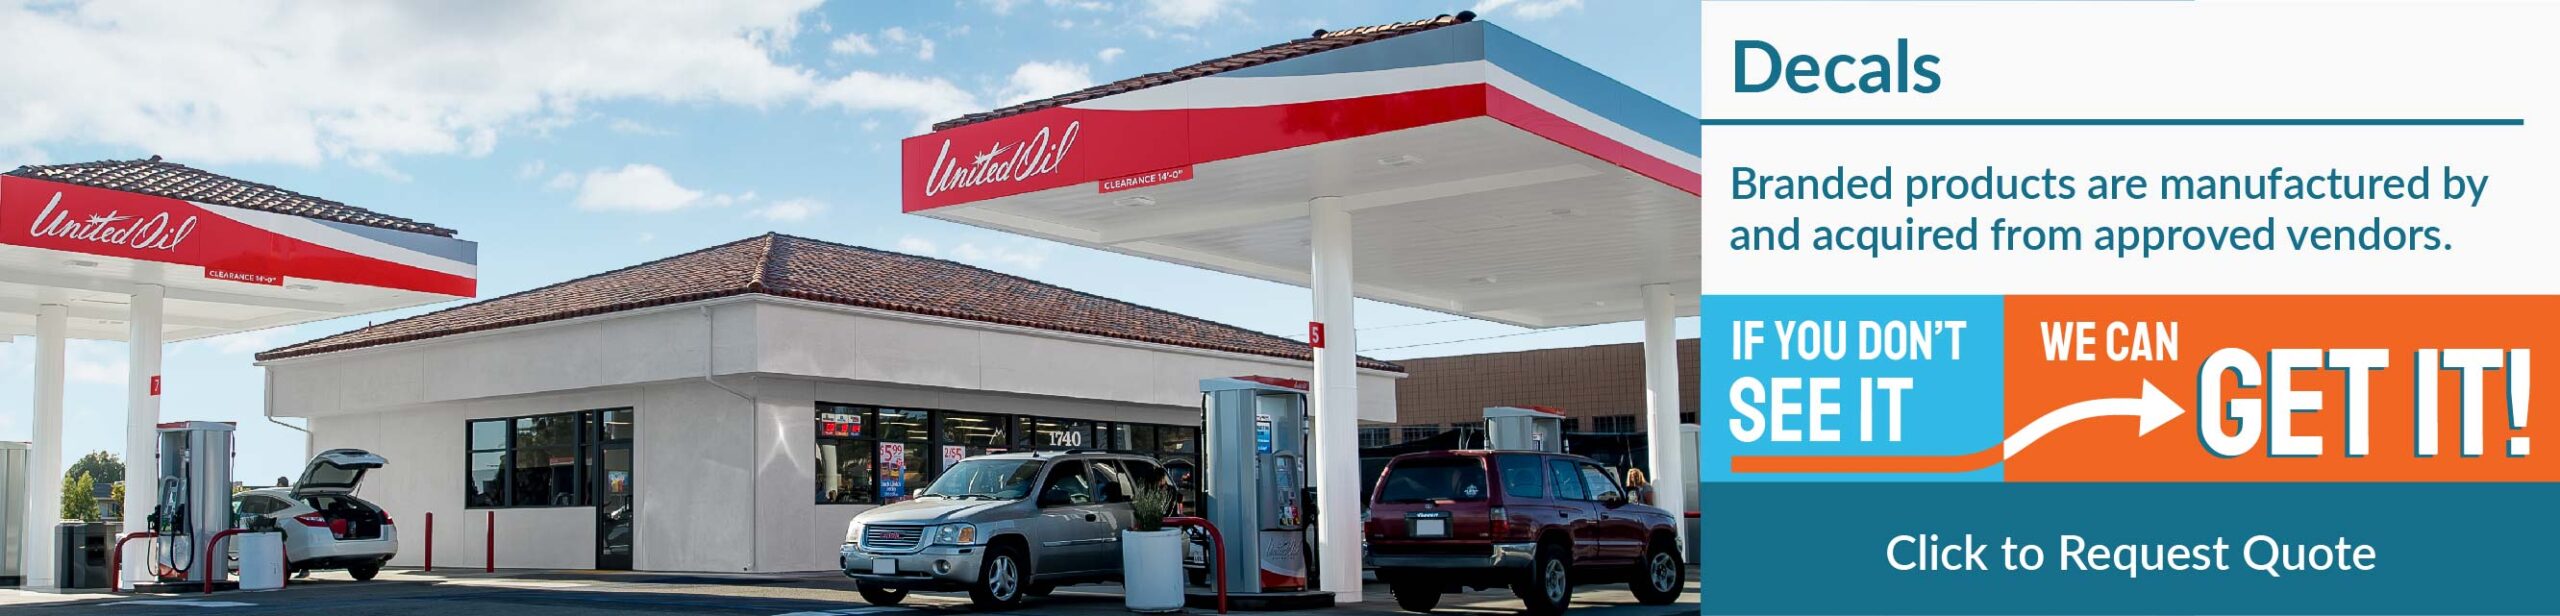 Gas Station Decal Web Banner